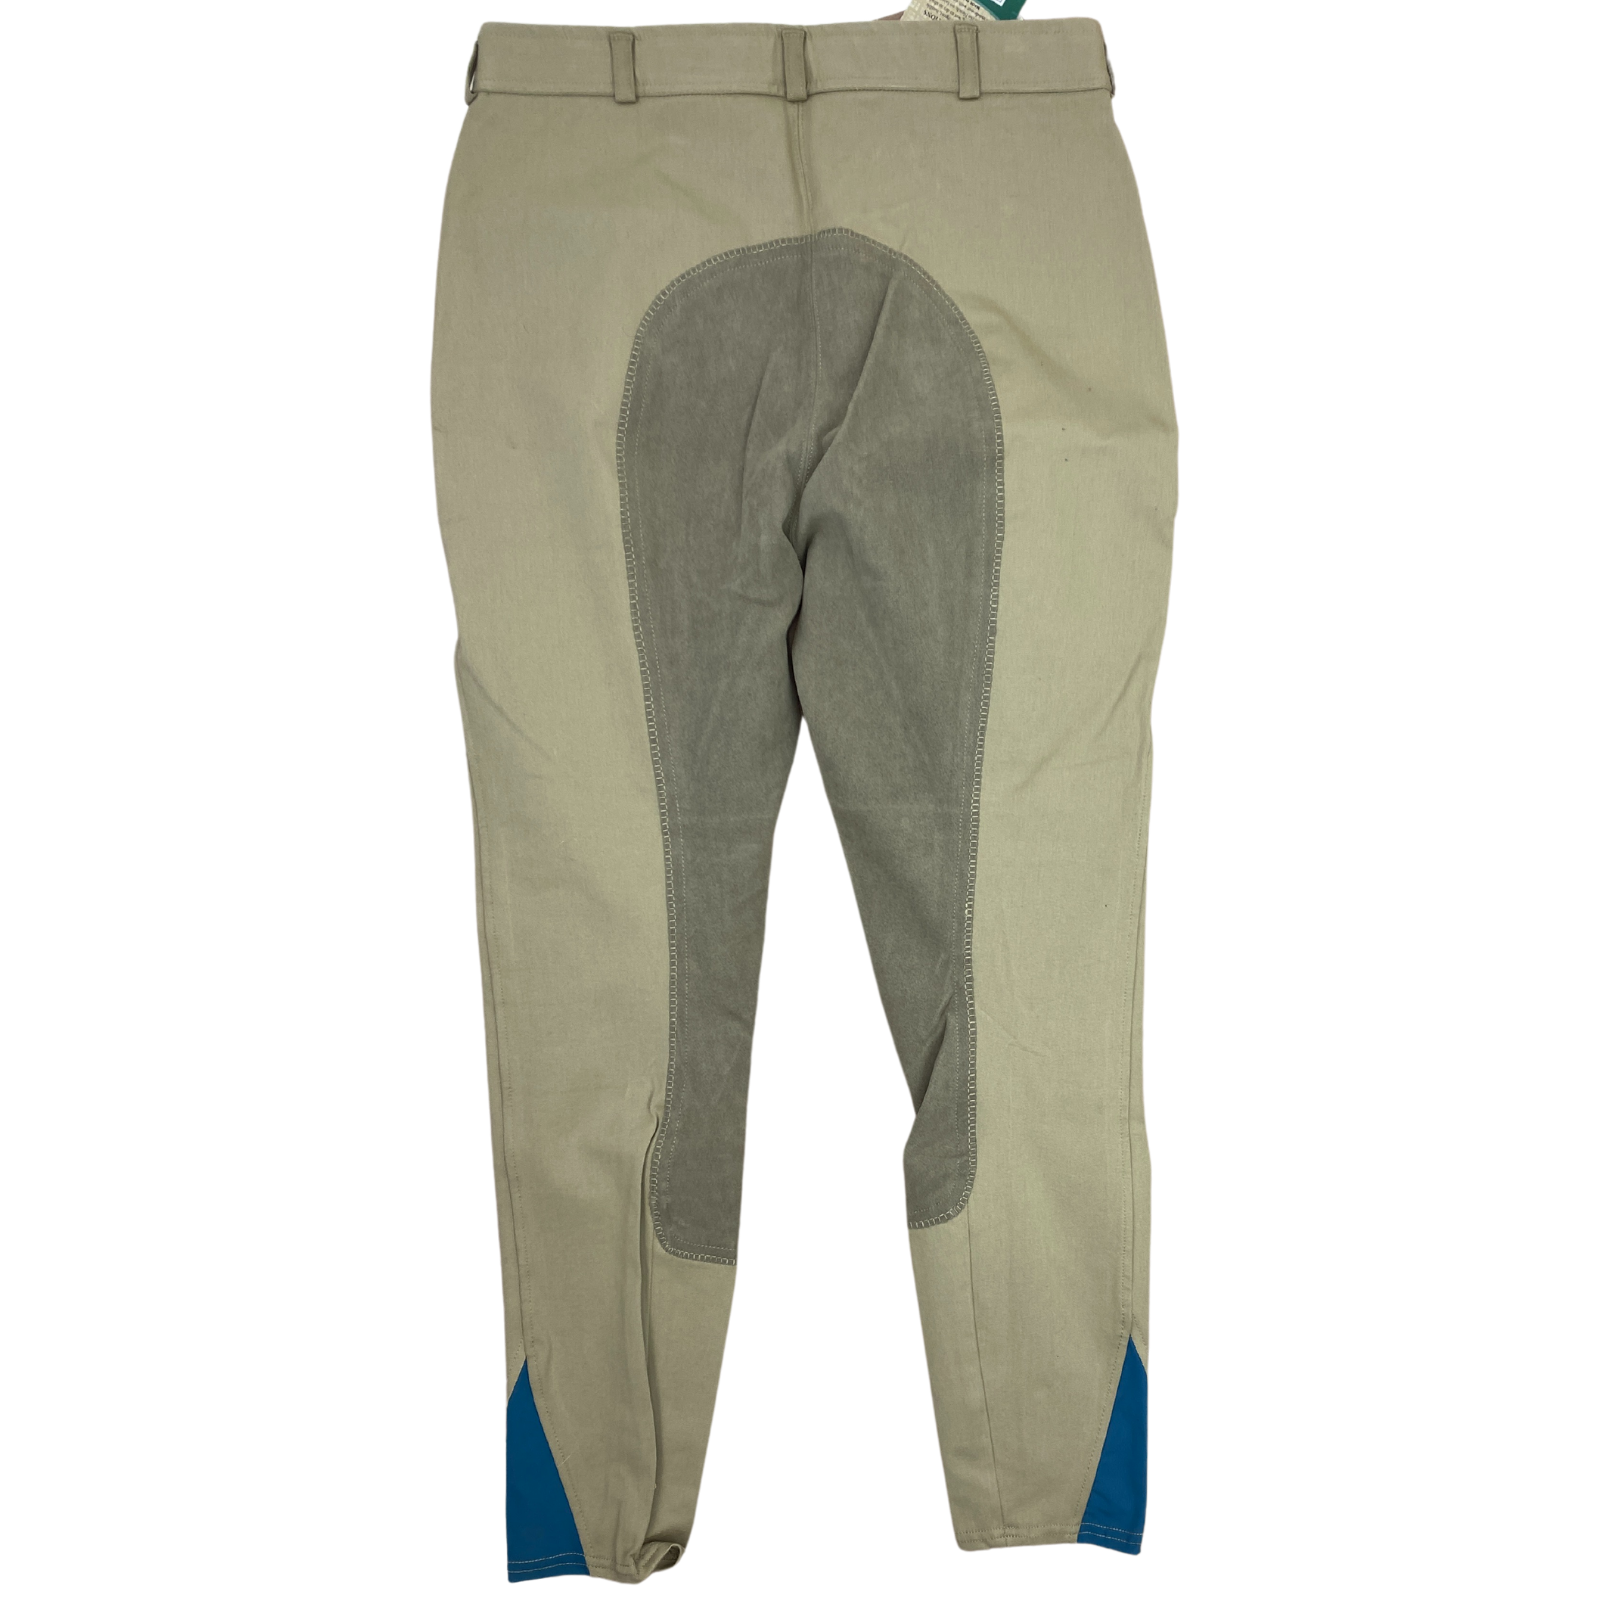 Back of Riding Sport Full Seat Breeches in Beige/Blue